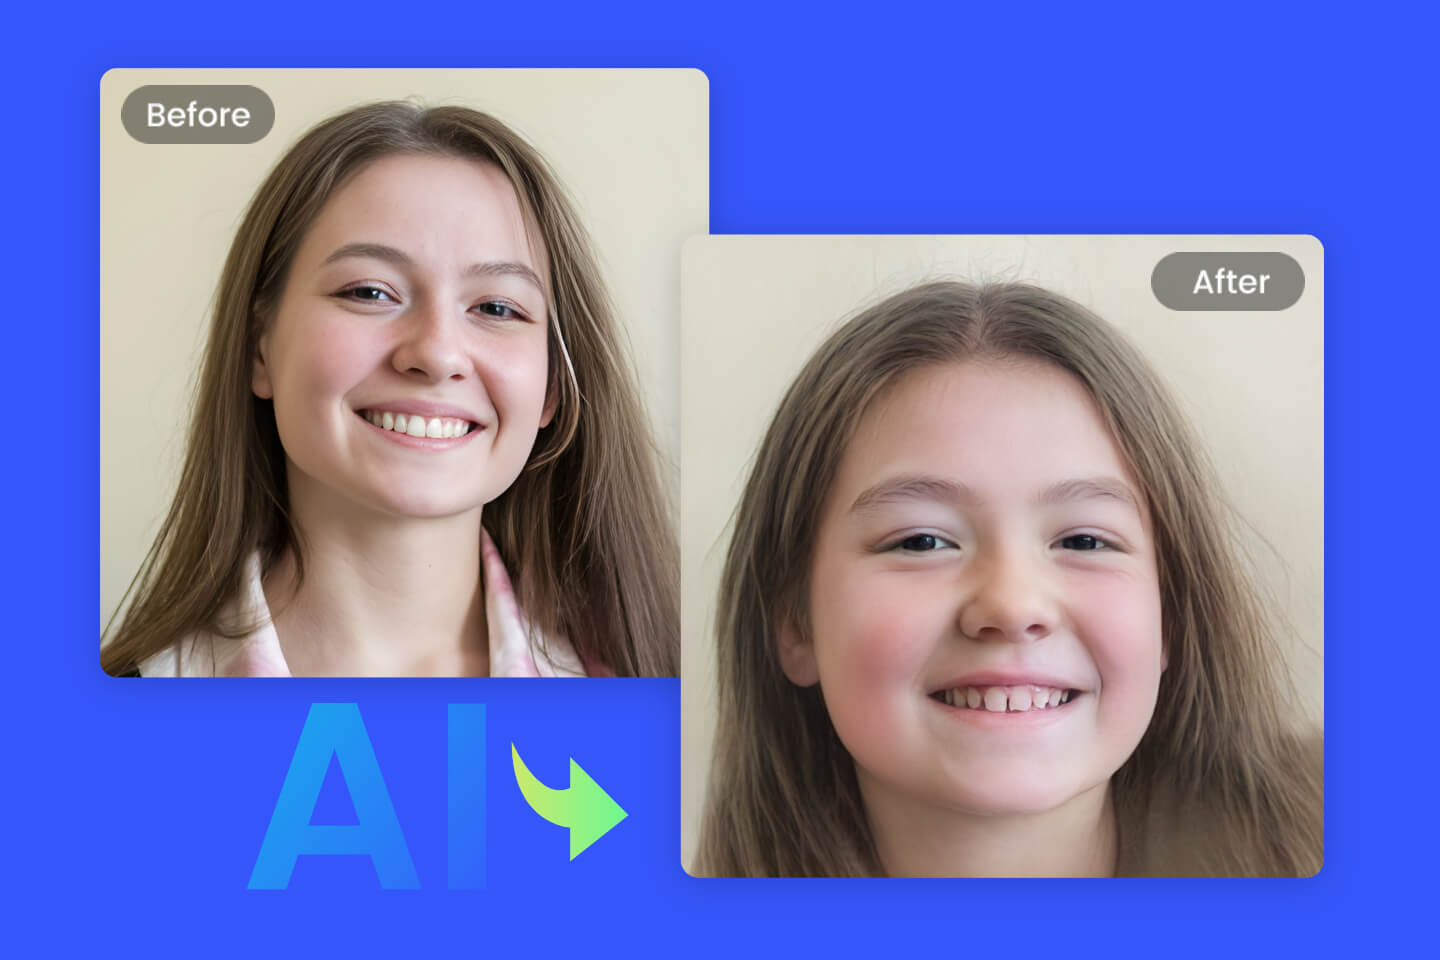 Convert a smiling girl image to a cute little girl using Fotor AI baby filter